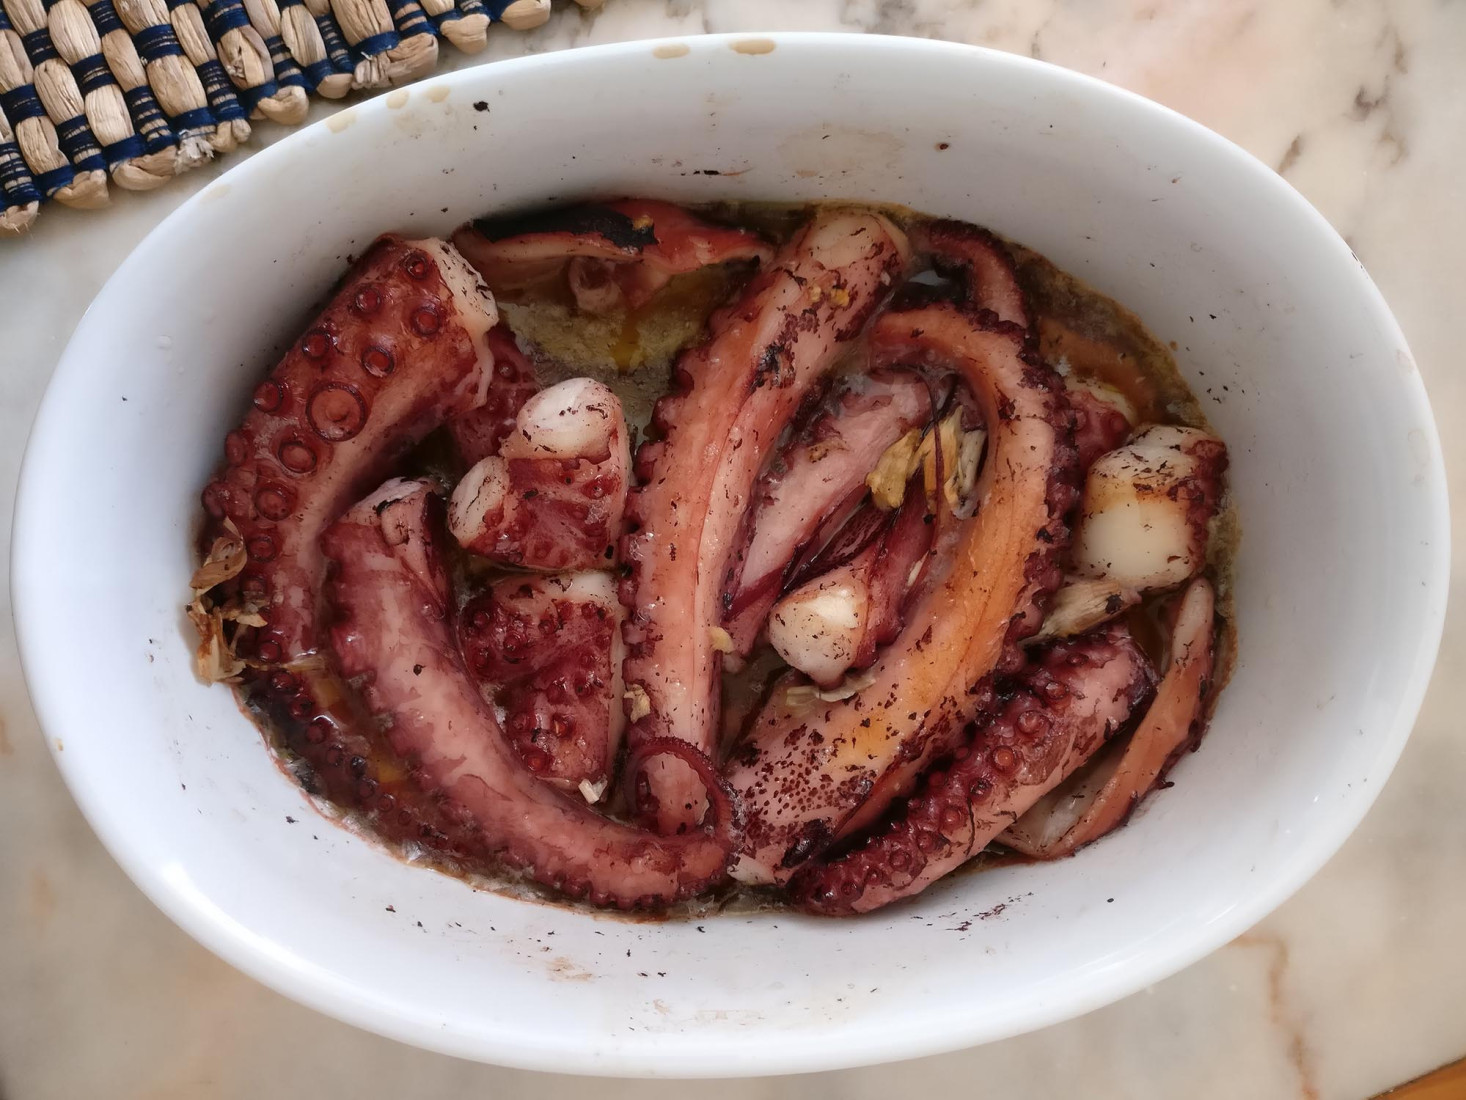 Octopus for lunch